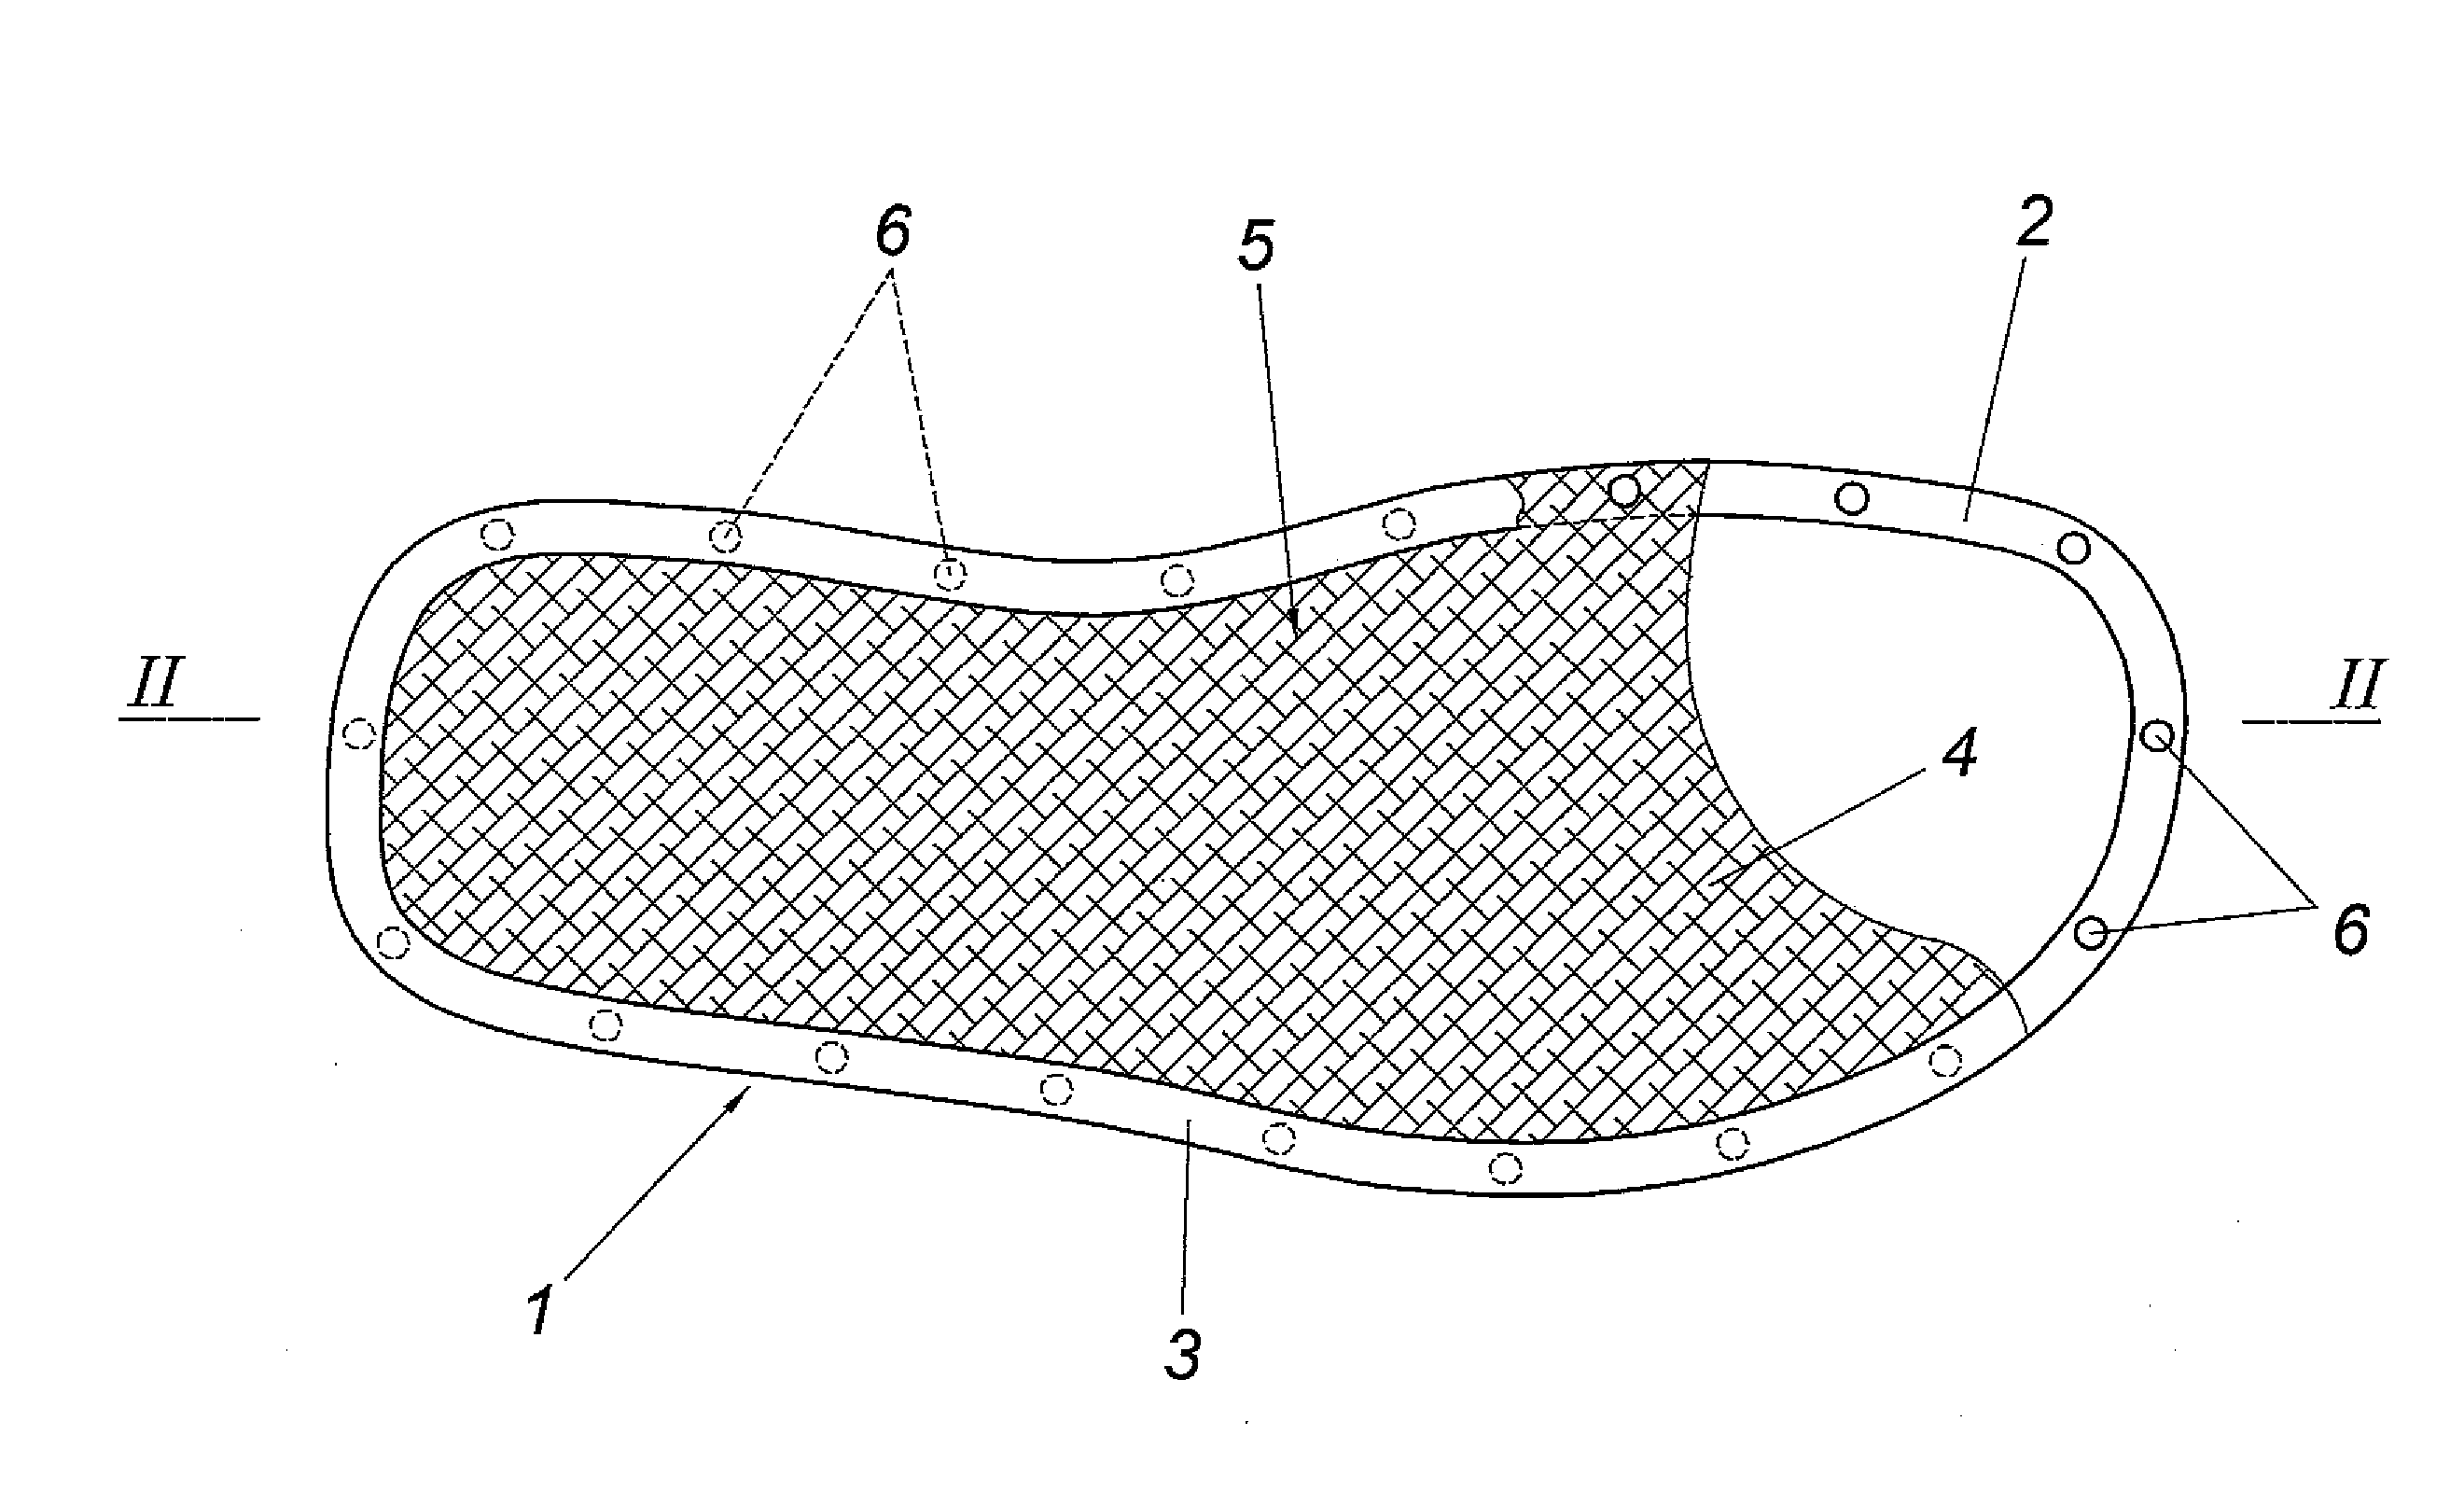 Shoe sole comprising a footbed